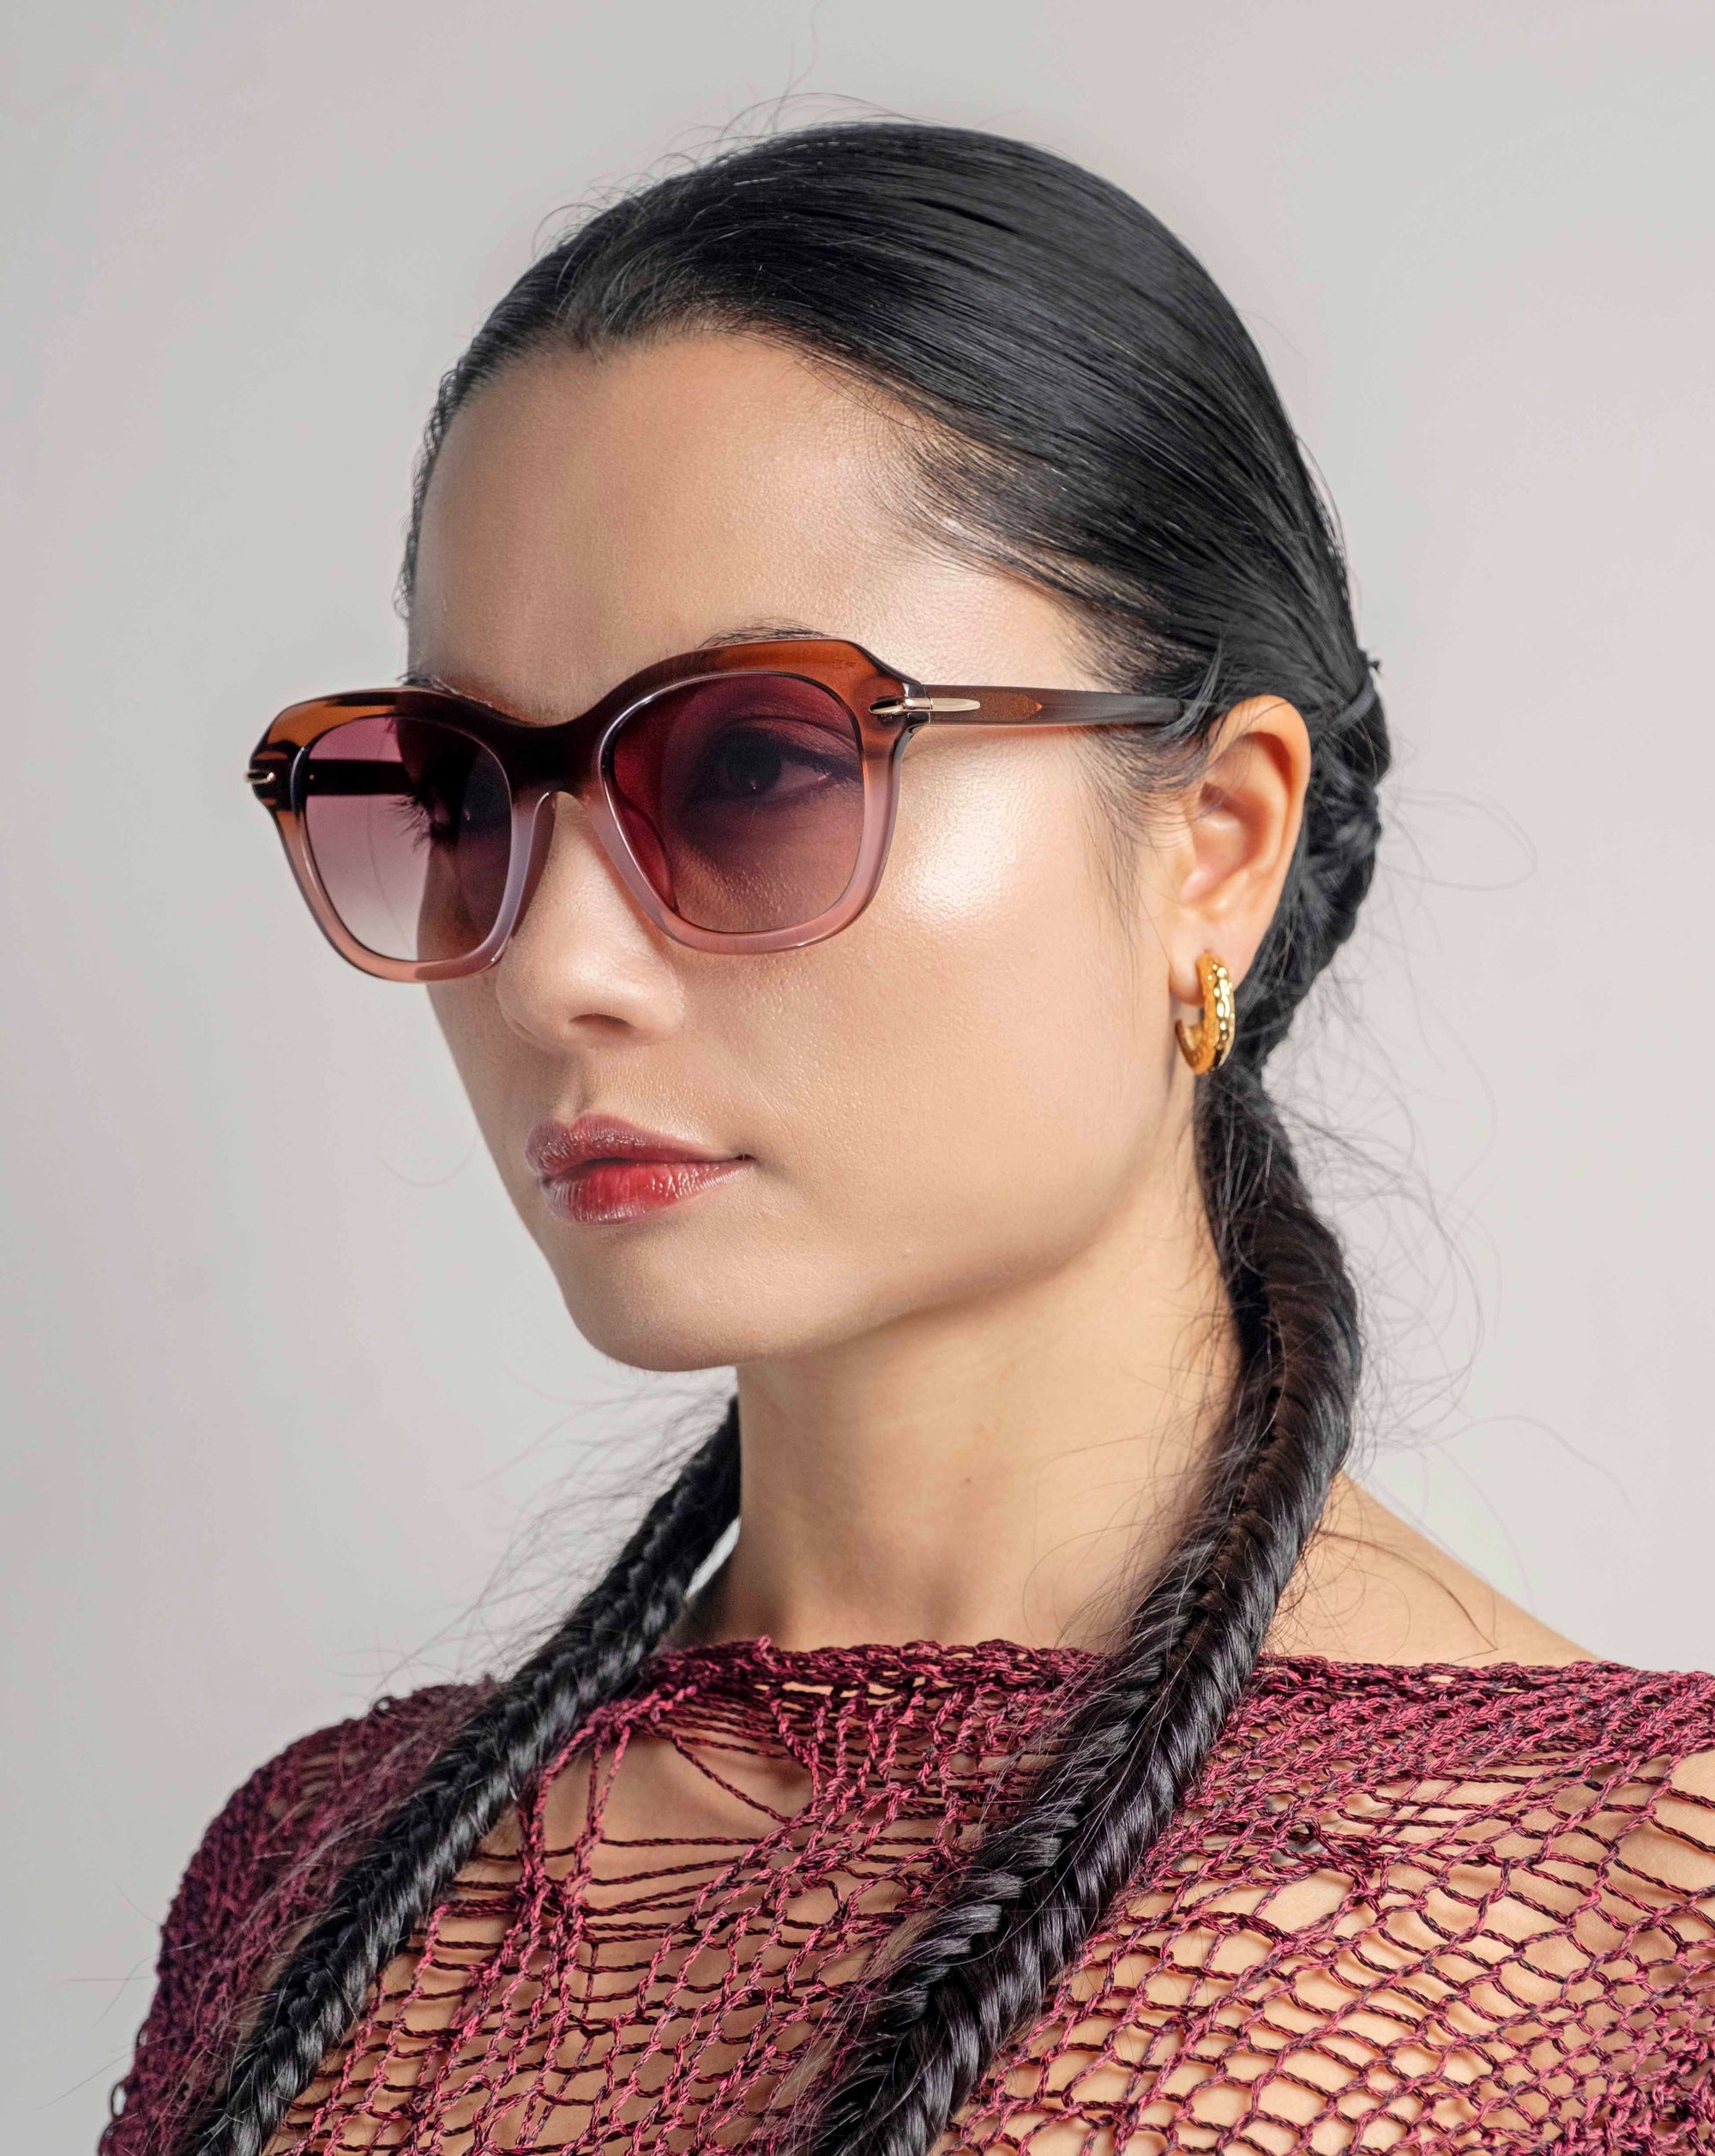 A woman with long, black braids wears oversized cat-eye sunglasses &quot;Helene&quot; by For Art&#39;s Sake®. She has gold hoop earrings and a calm expression, facing slightly to the right. The background is a plain, neutral tone.